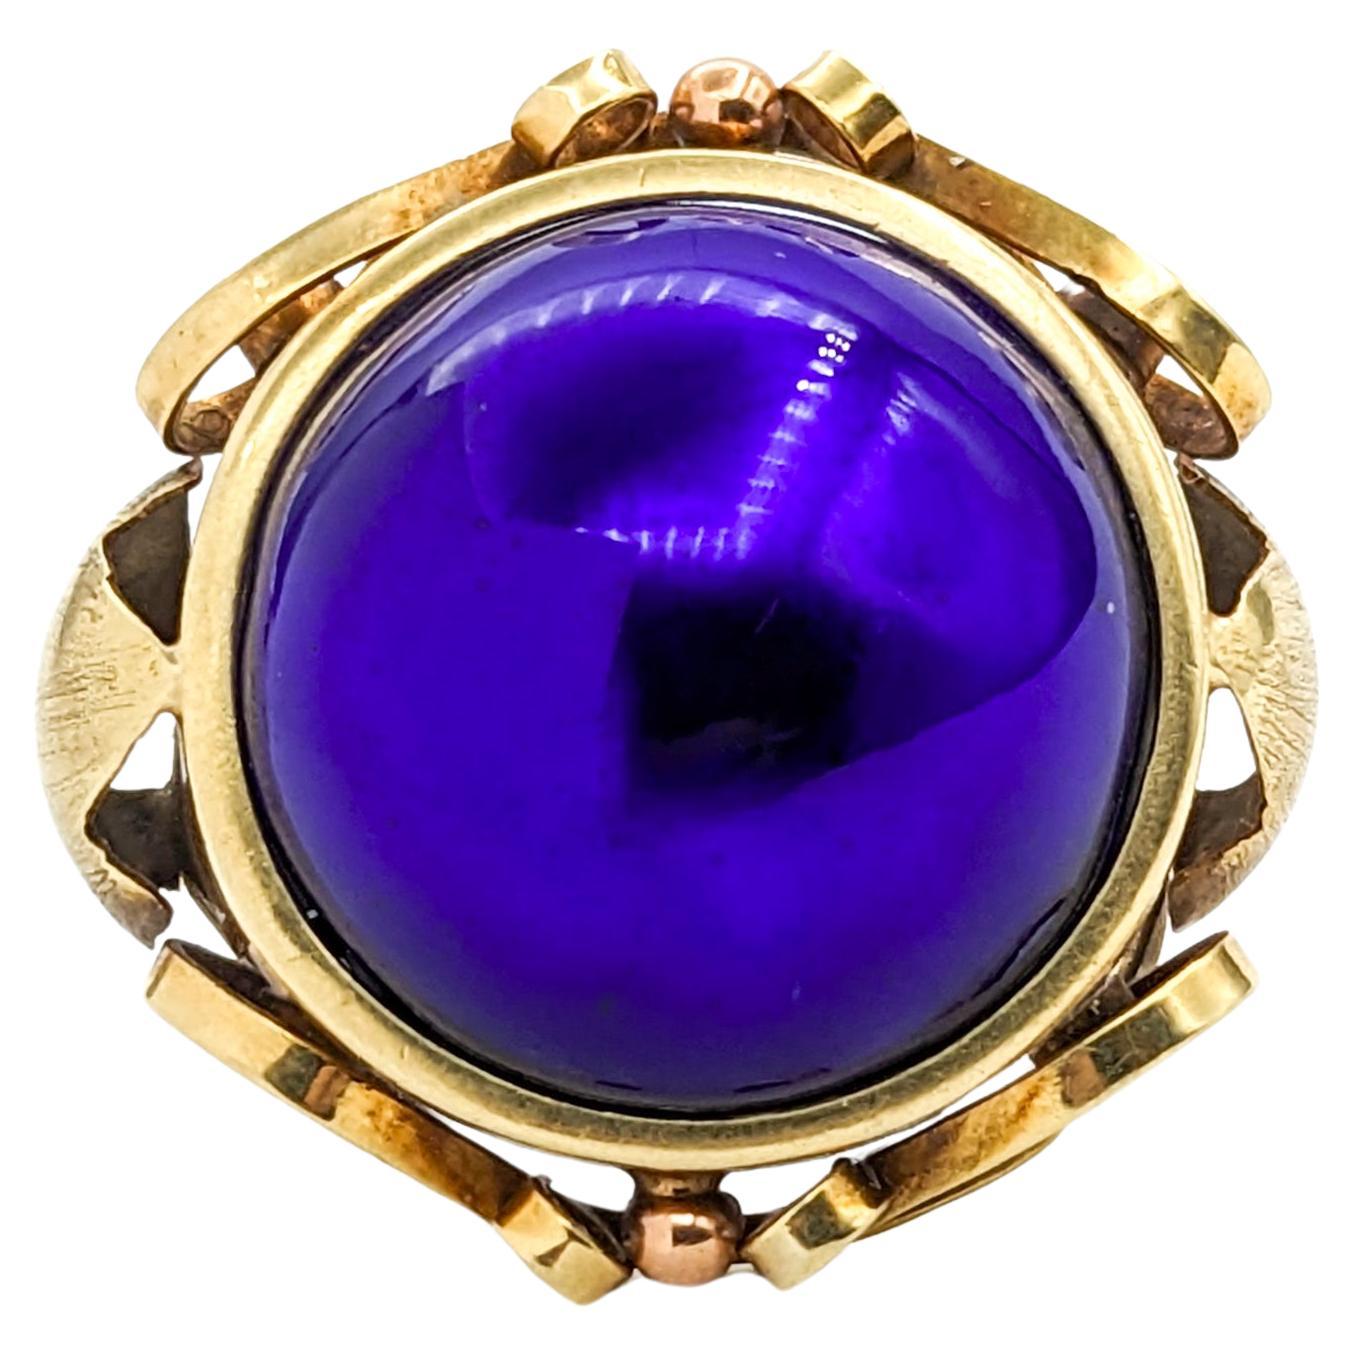 Vintage Blue Enameled Dome Ring In Yellow Gold

Introducing this exquisite Vintage Enamel Ring, a true embodiment of Mid-Century elegance, crafted in rich 14k yellow gold. This unique piece features a striking cobalt blue enameled dome centerpiece,